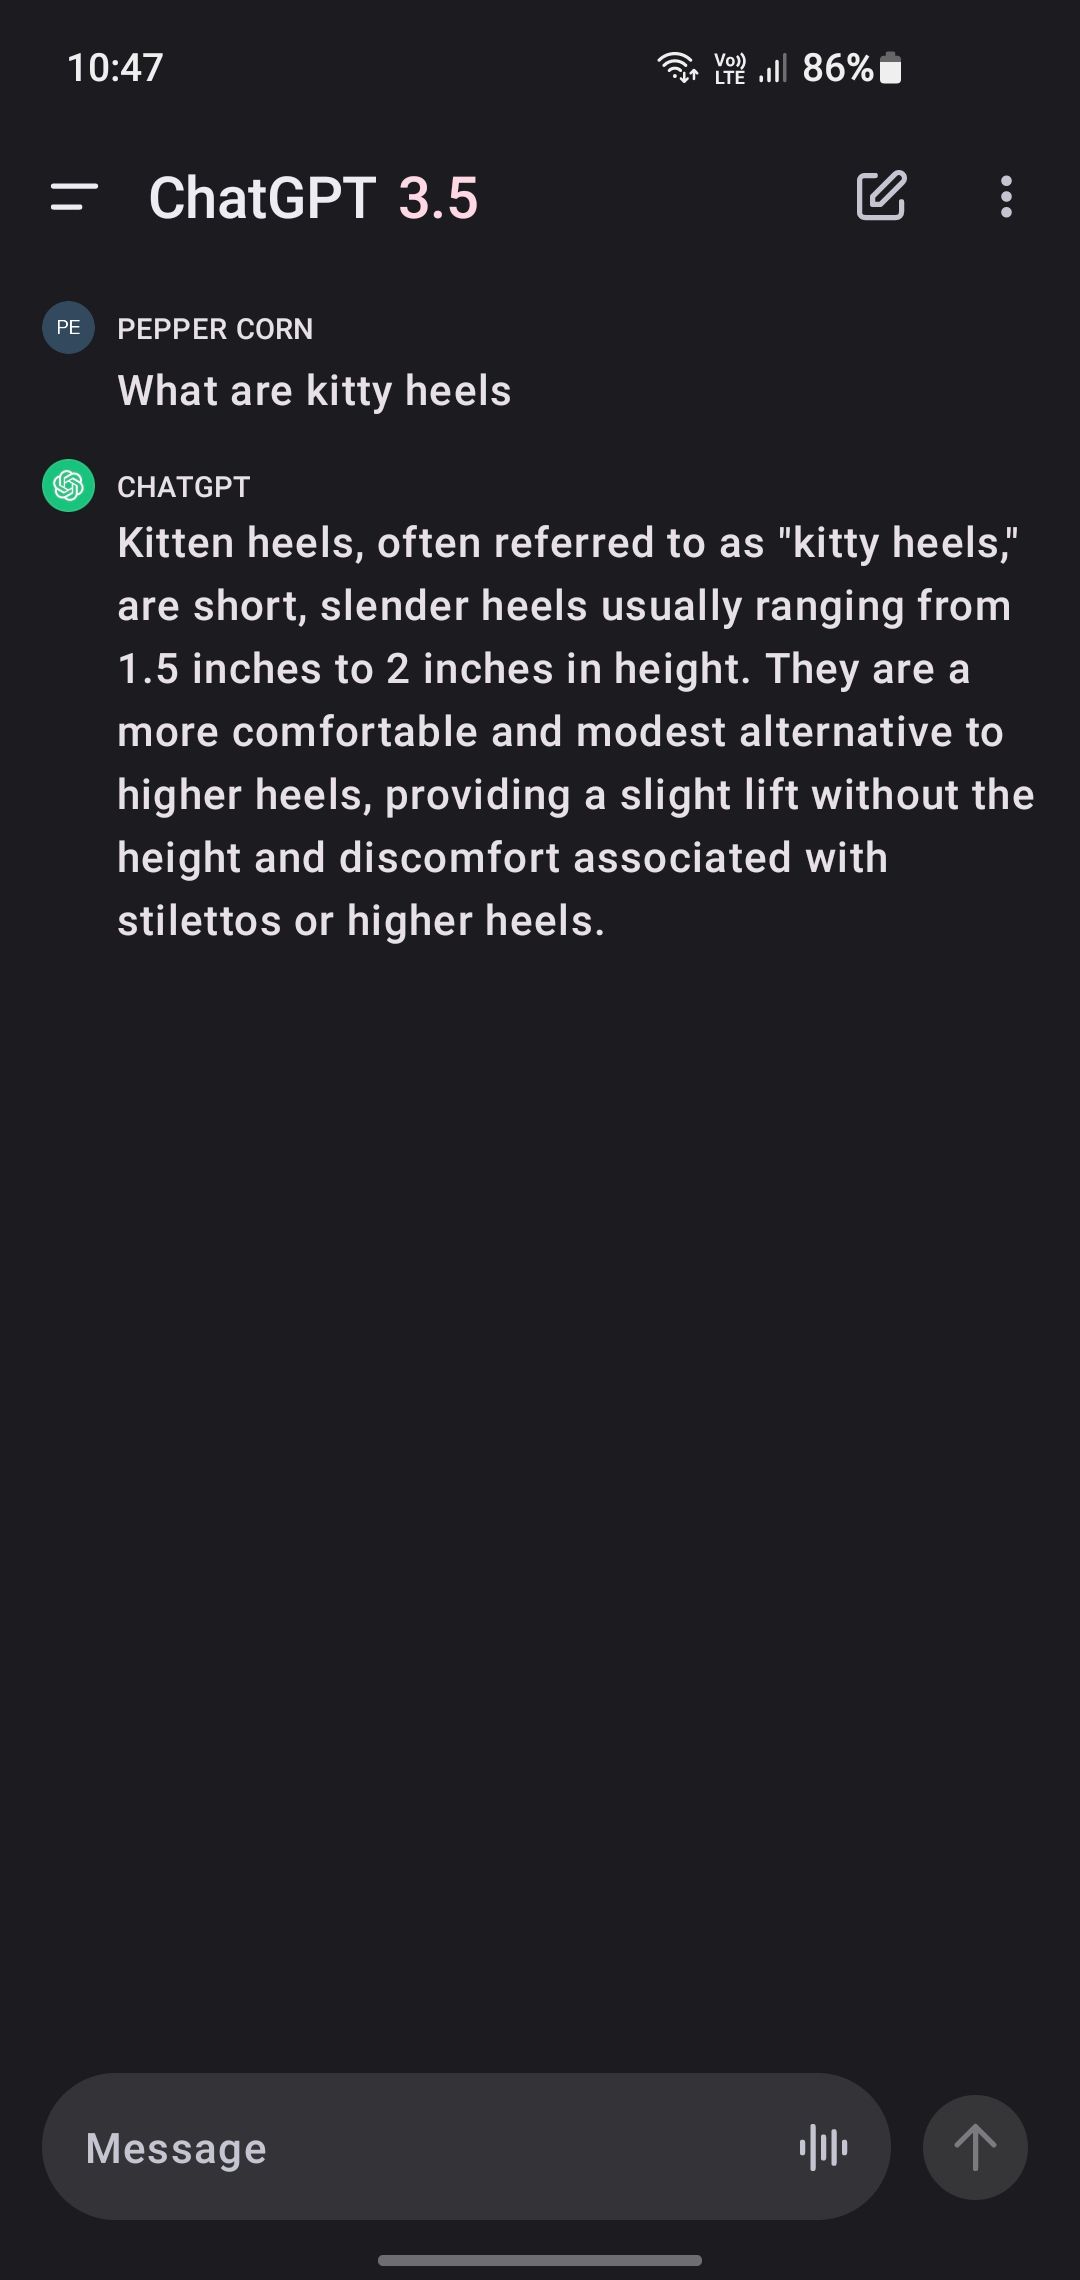 ChatGPT explains what kitty heels are